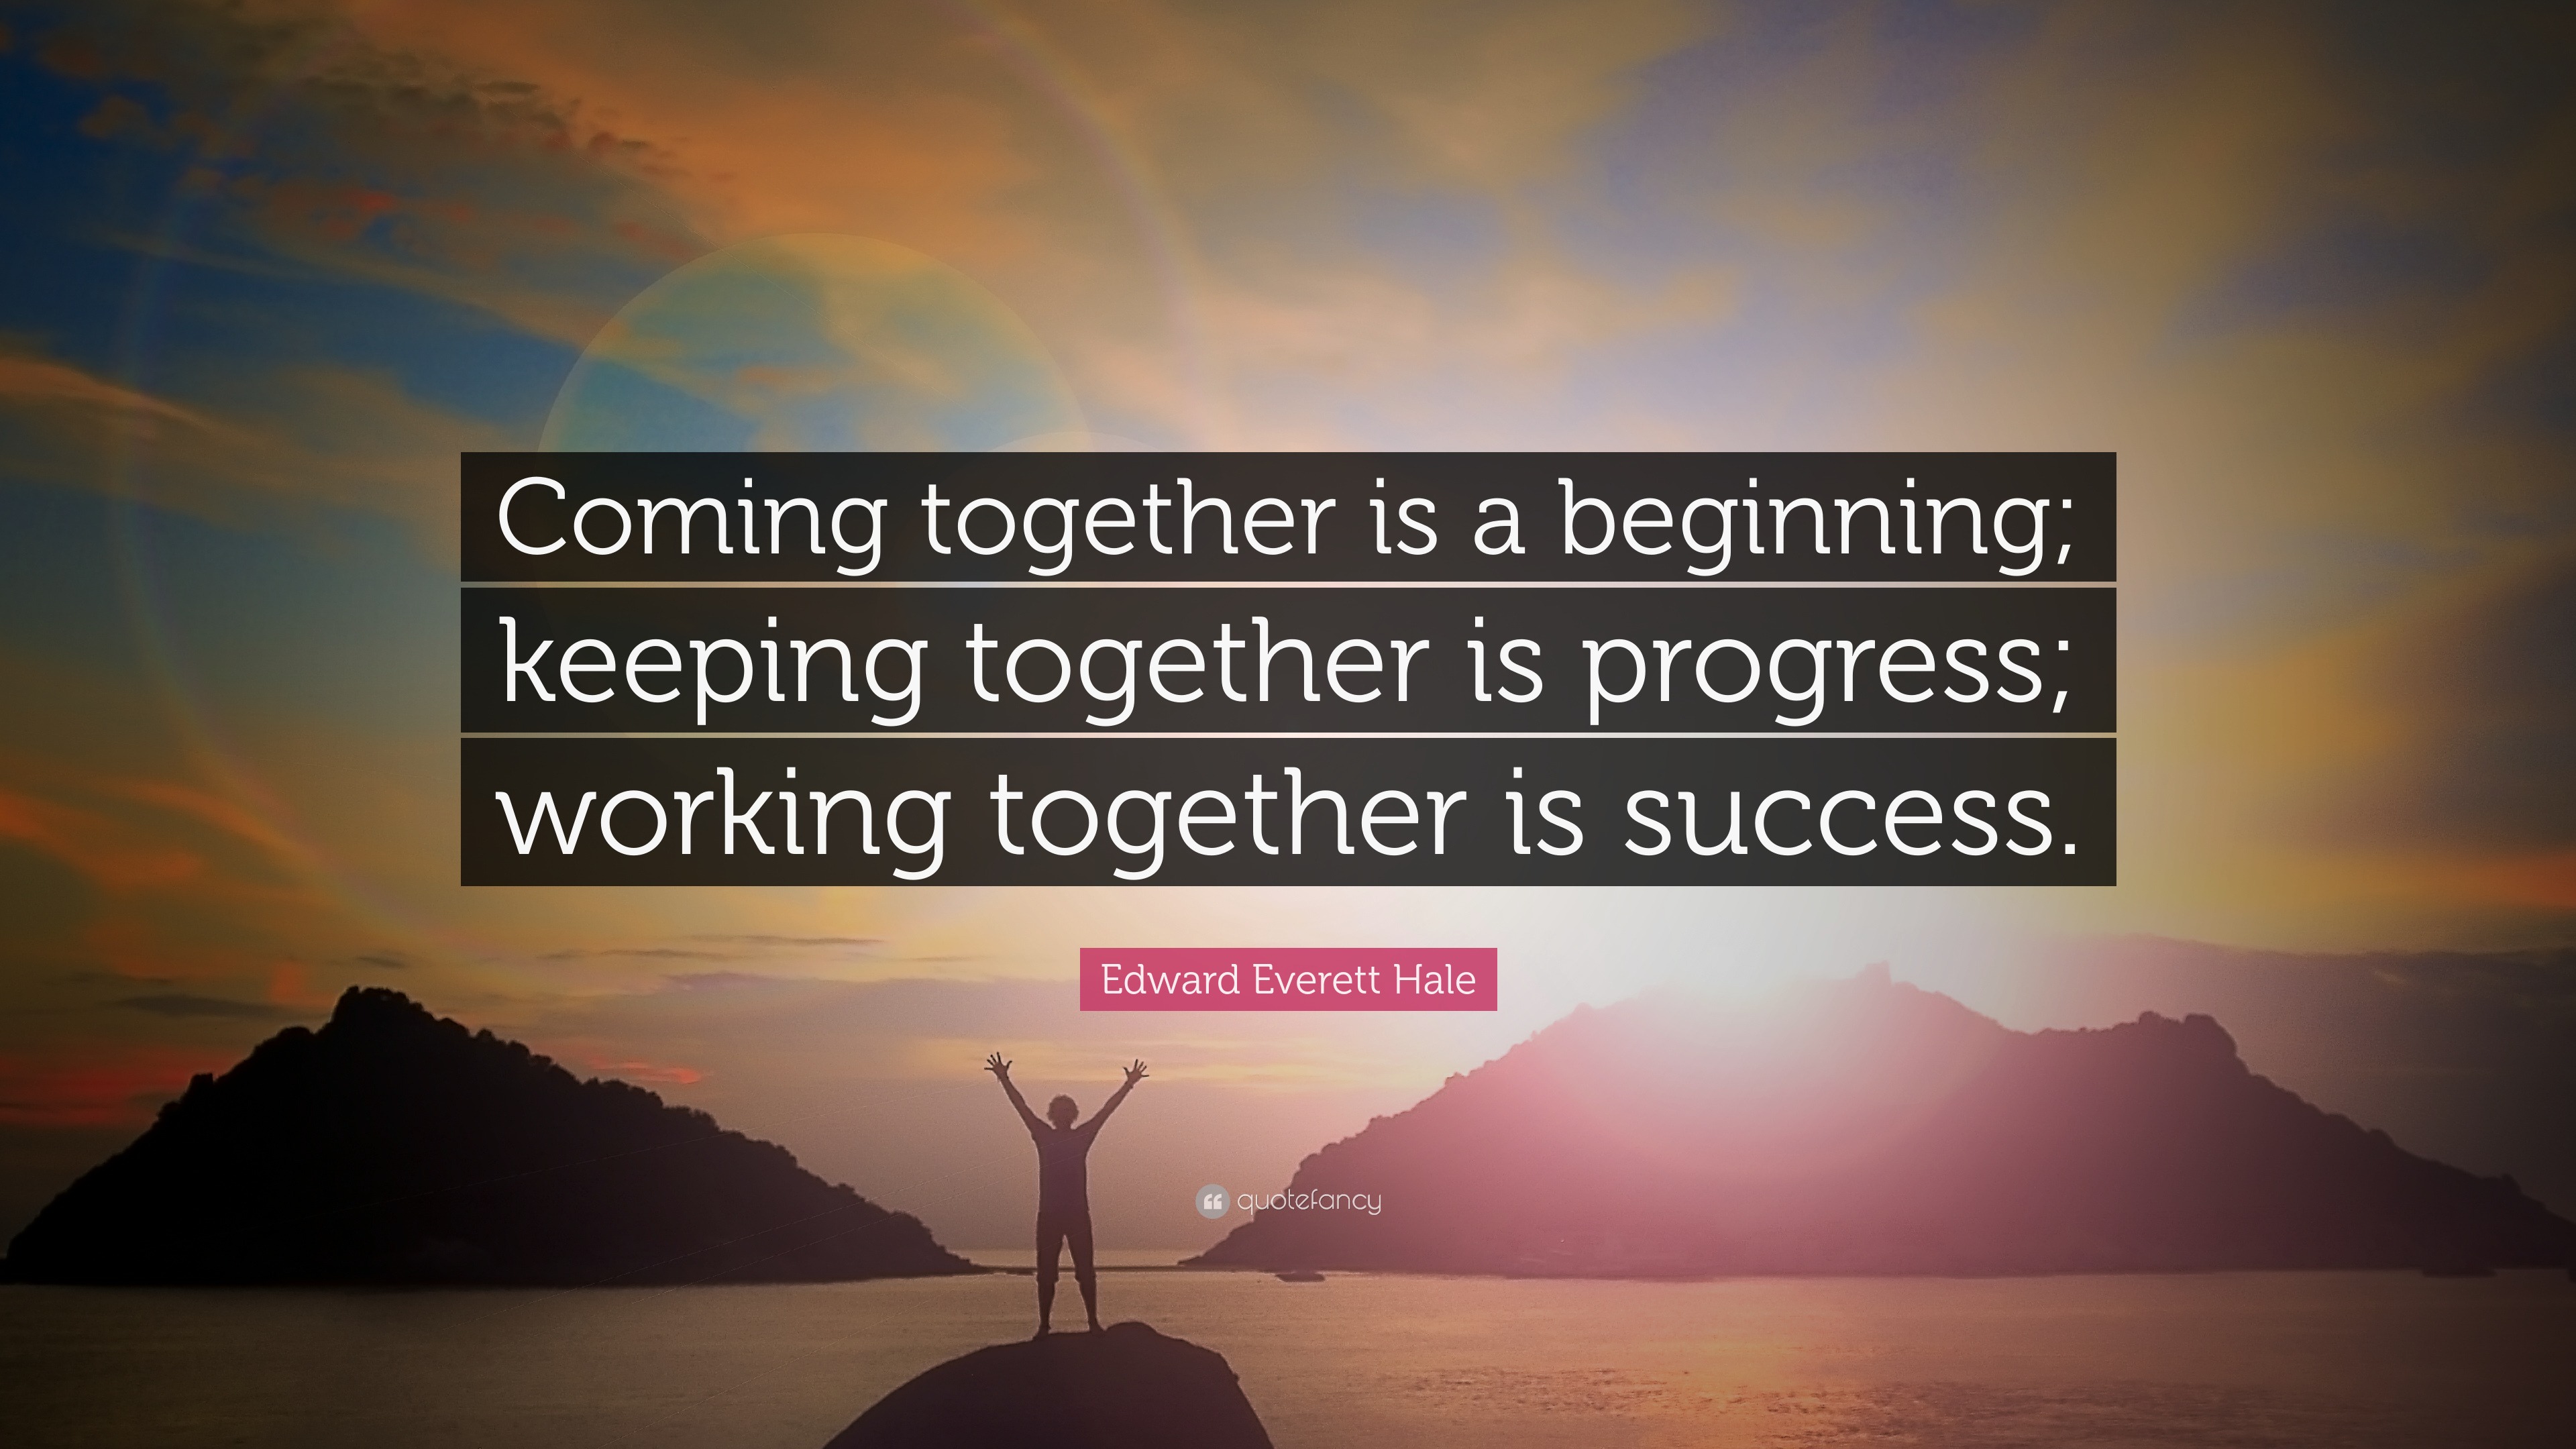 Edward Everett Hale Quote: “Coming together is a beginning; keeping